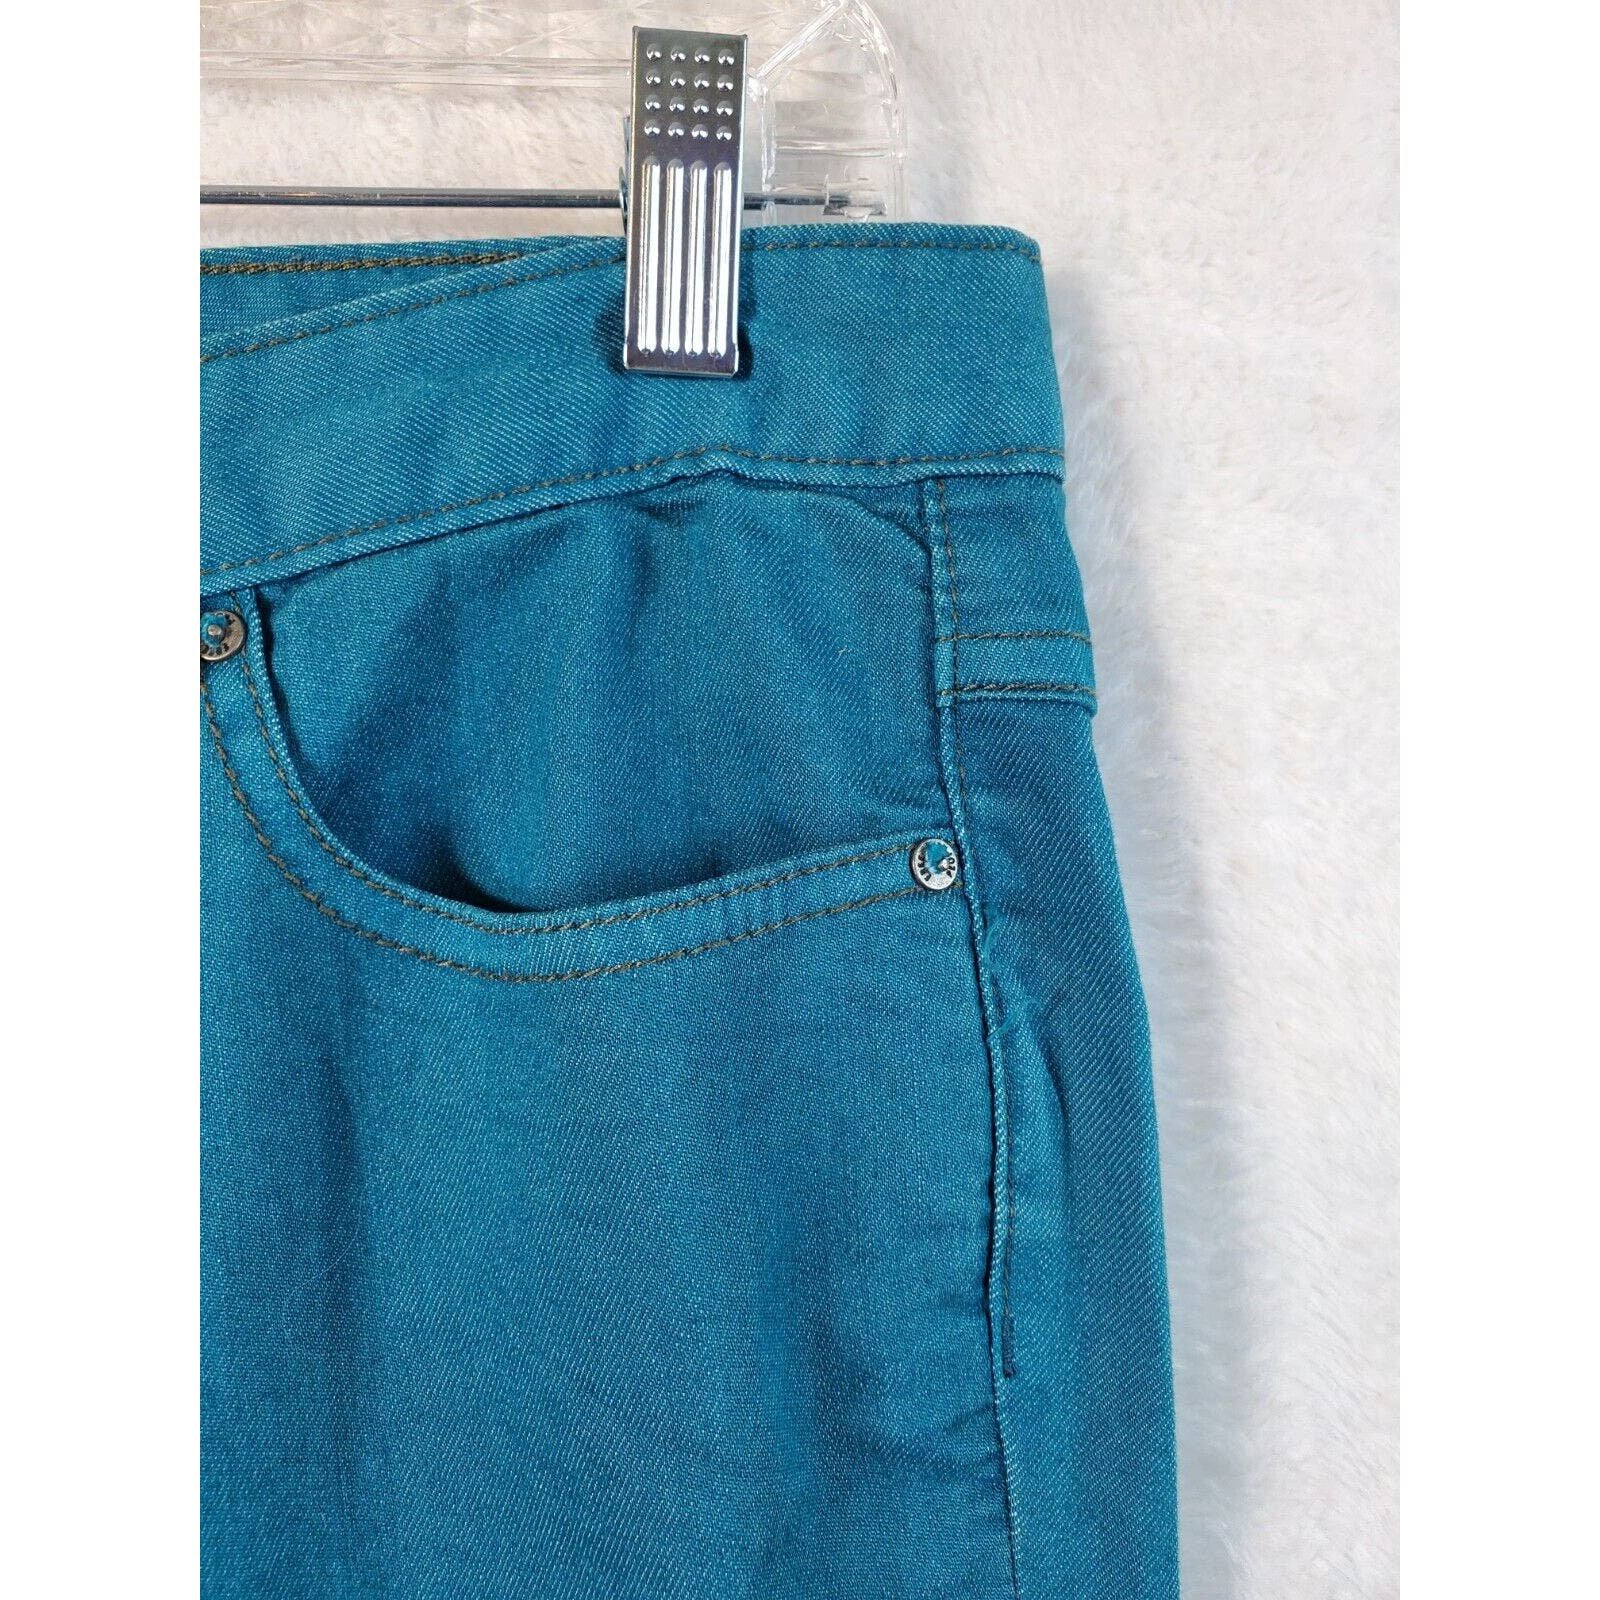 Discounted Free People Pants Womens Size 30 Teal Pockets Straight Leg Belt Loops Pull On LiUIj2IAL Outlet Store